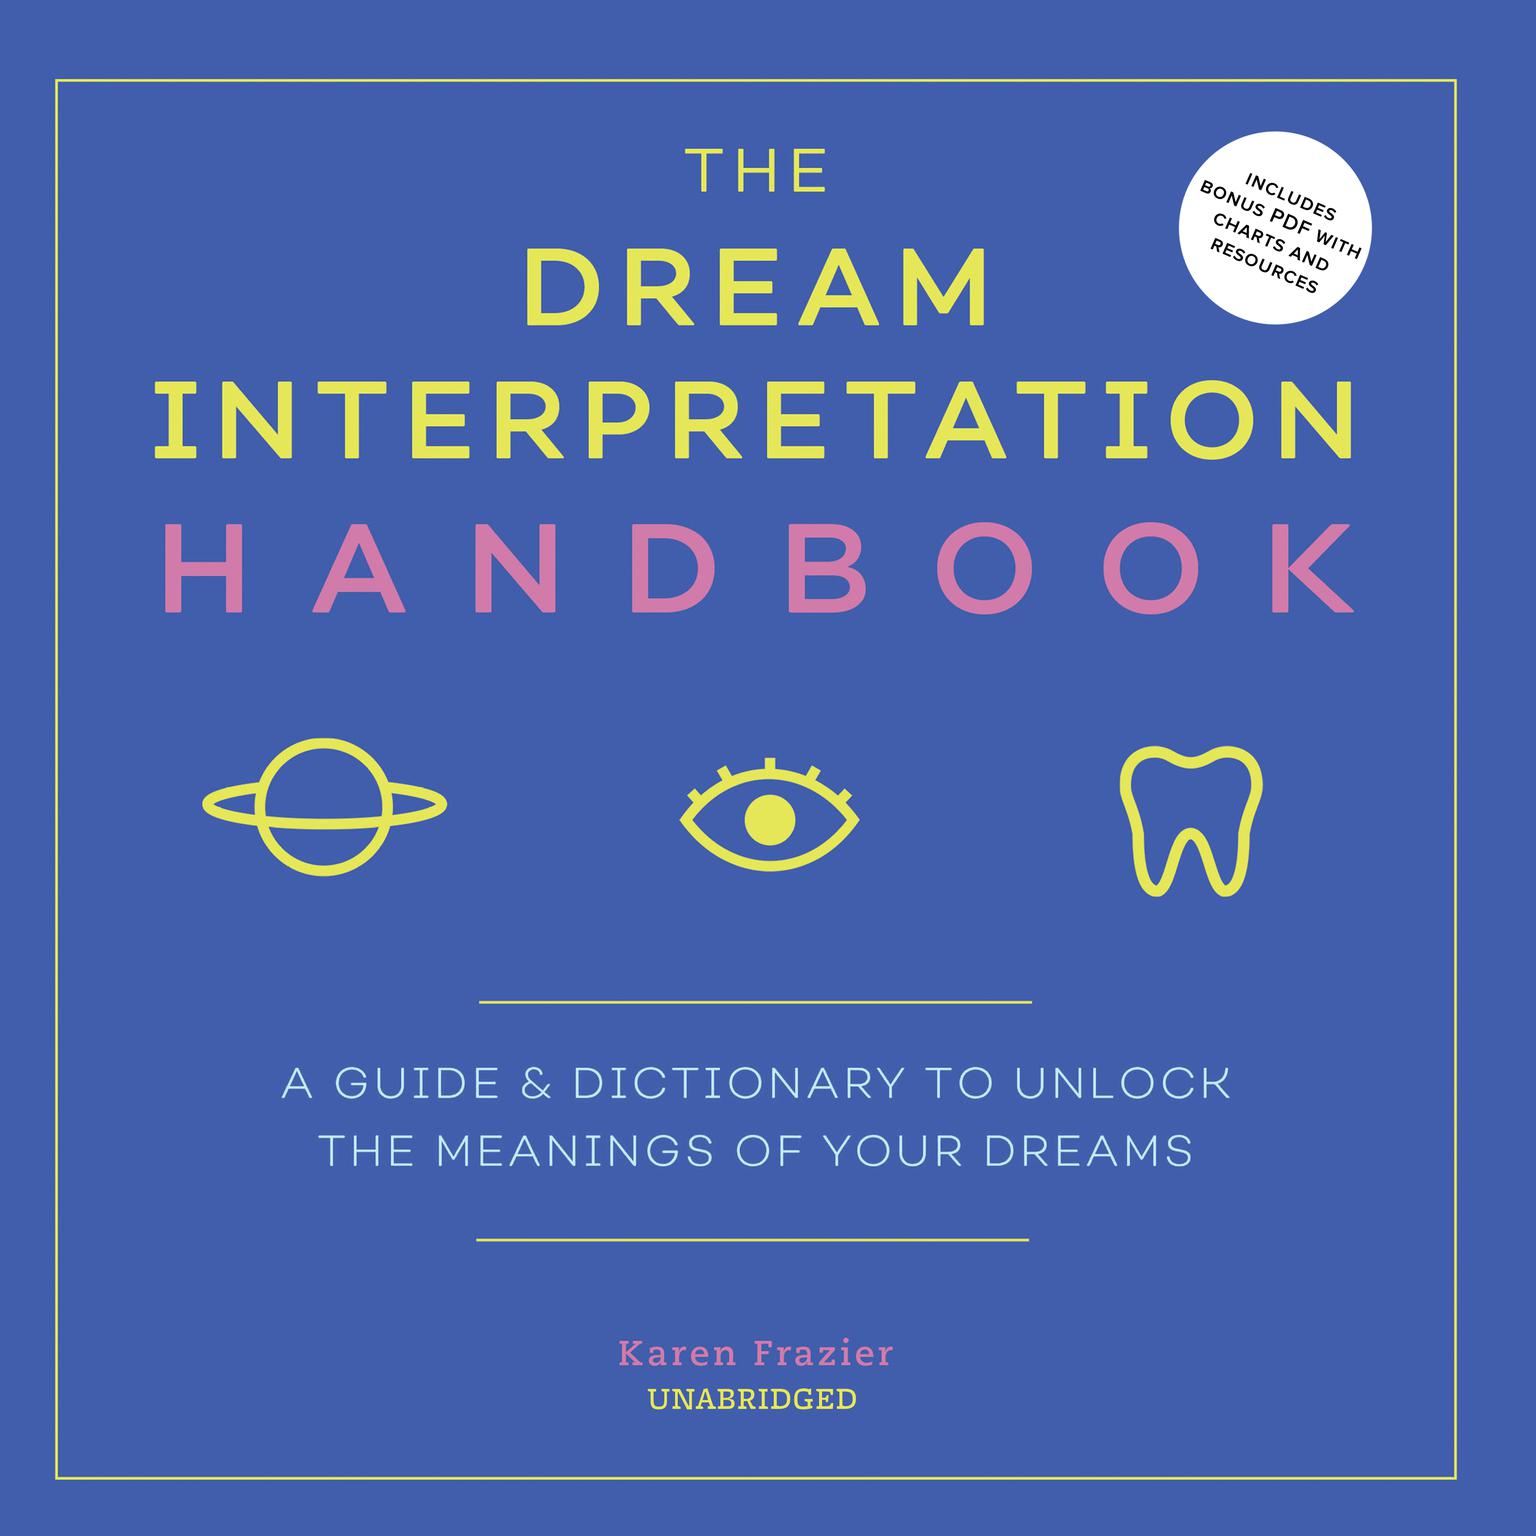 The Dream Interpretation Handbook: A Guide and Dictionary to Unlock the Meanings of Your Dreams Audiobook, by Karen Frazier